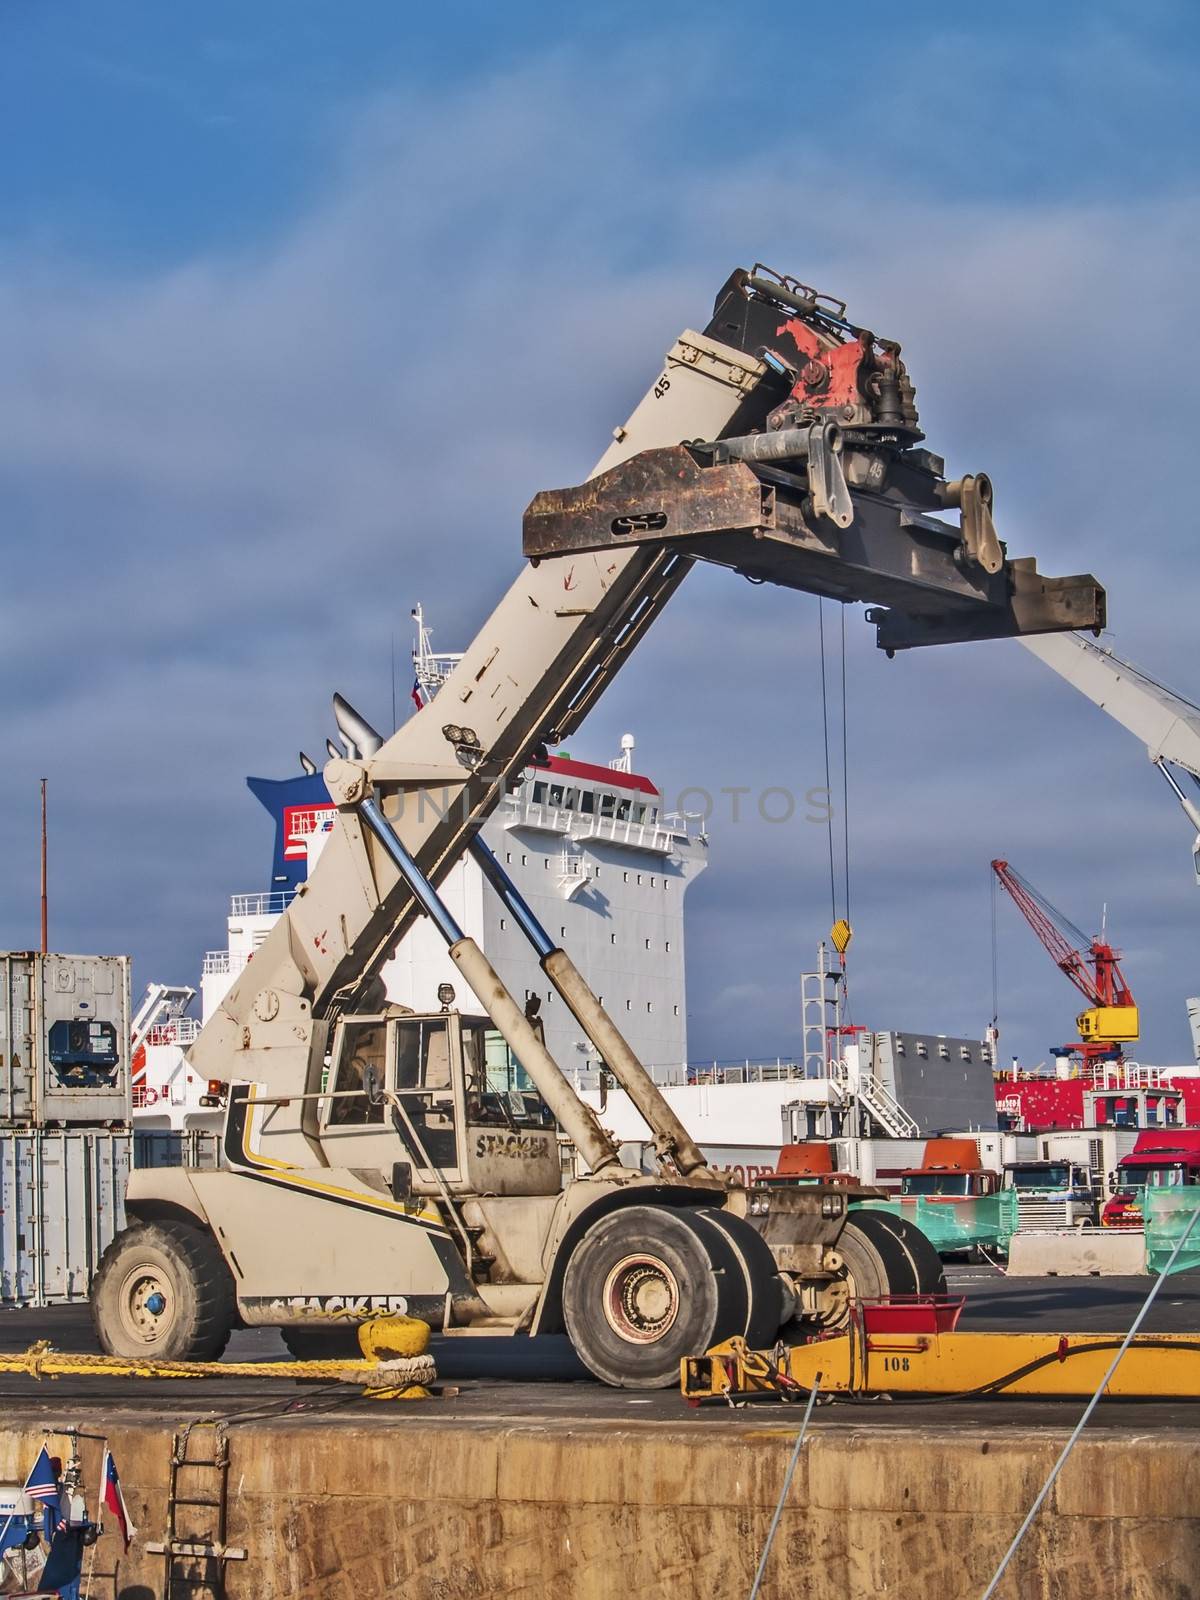 Mobile crane at docks by fxegs